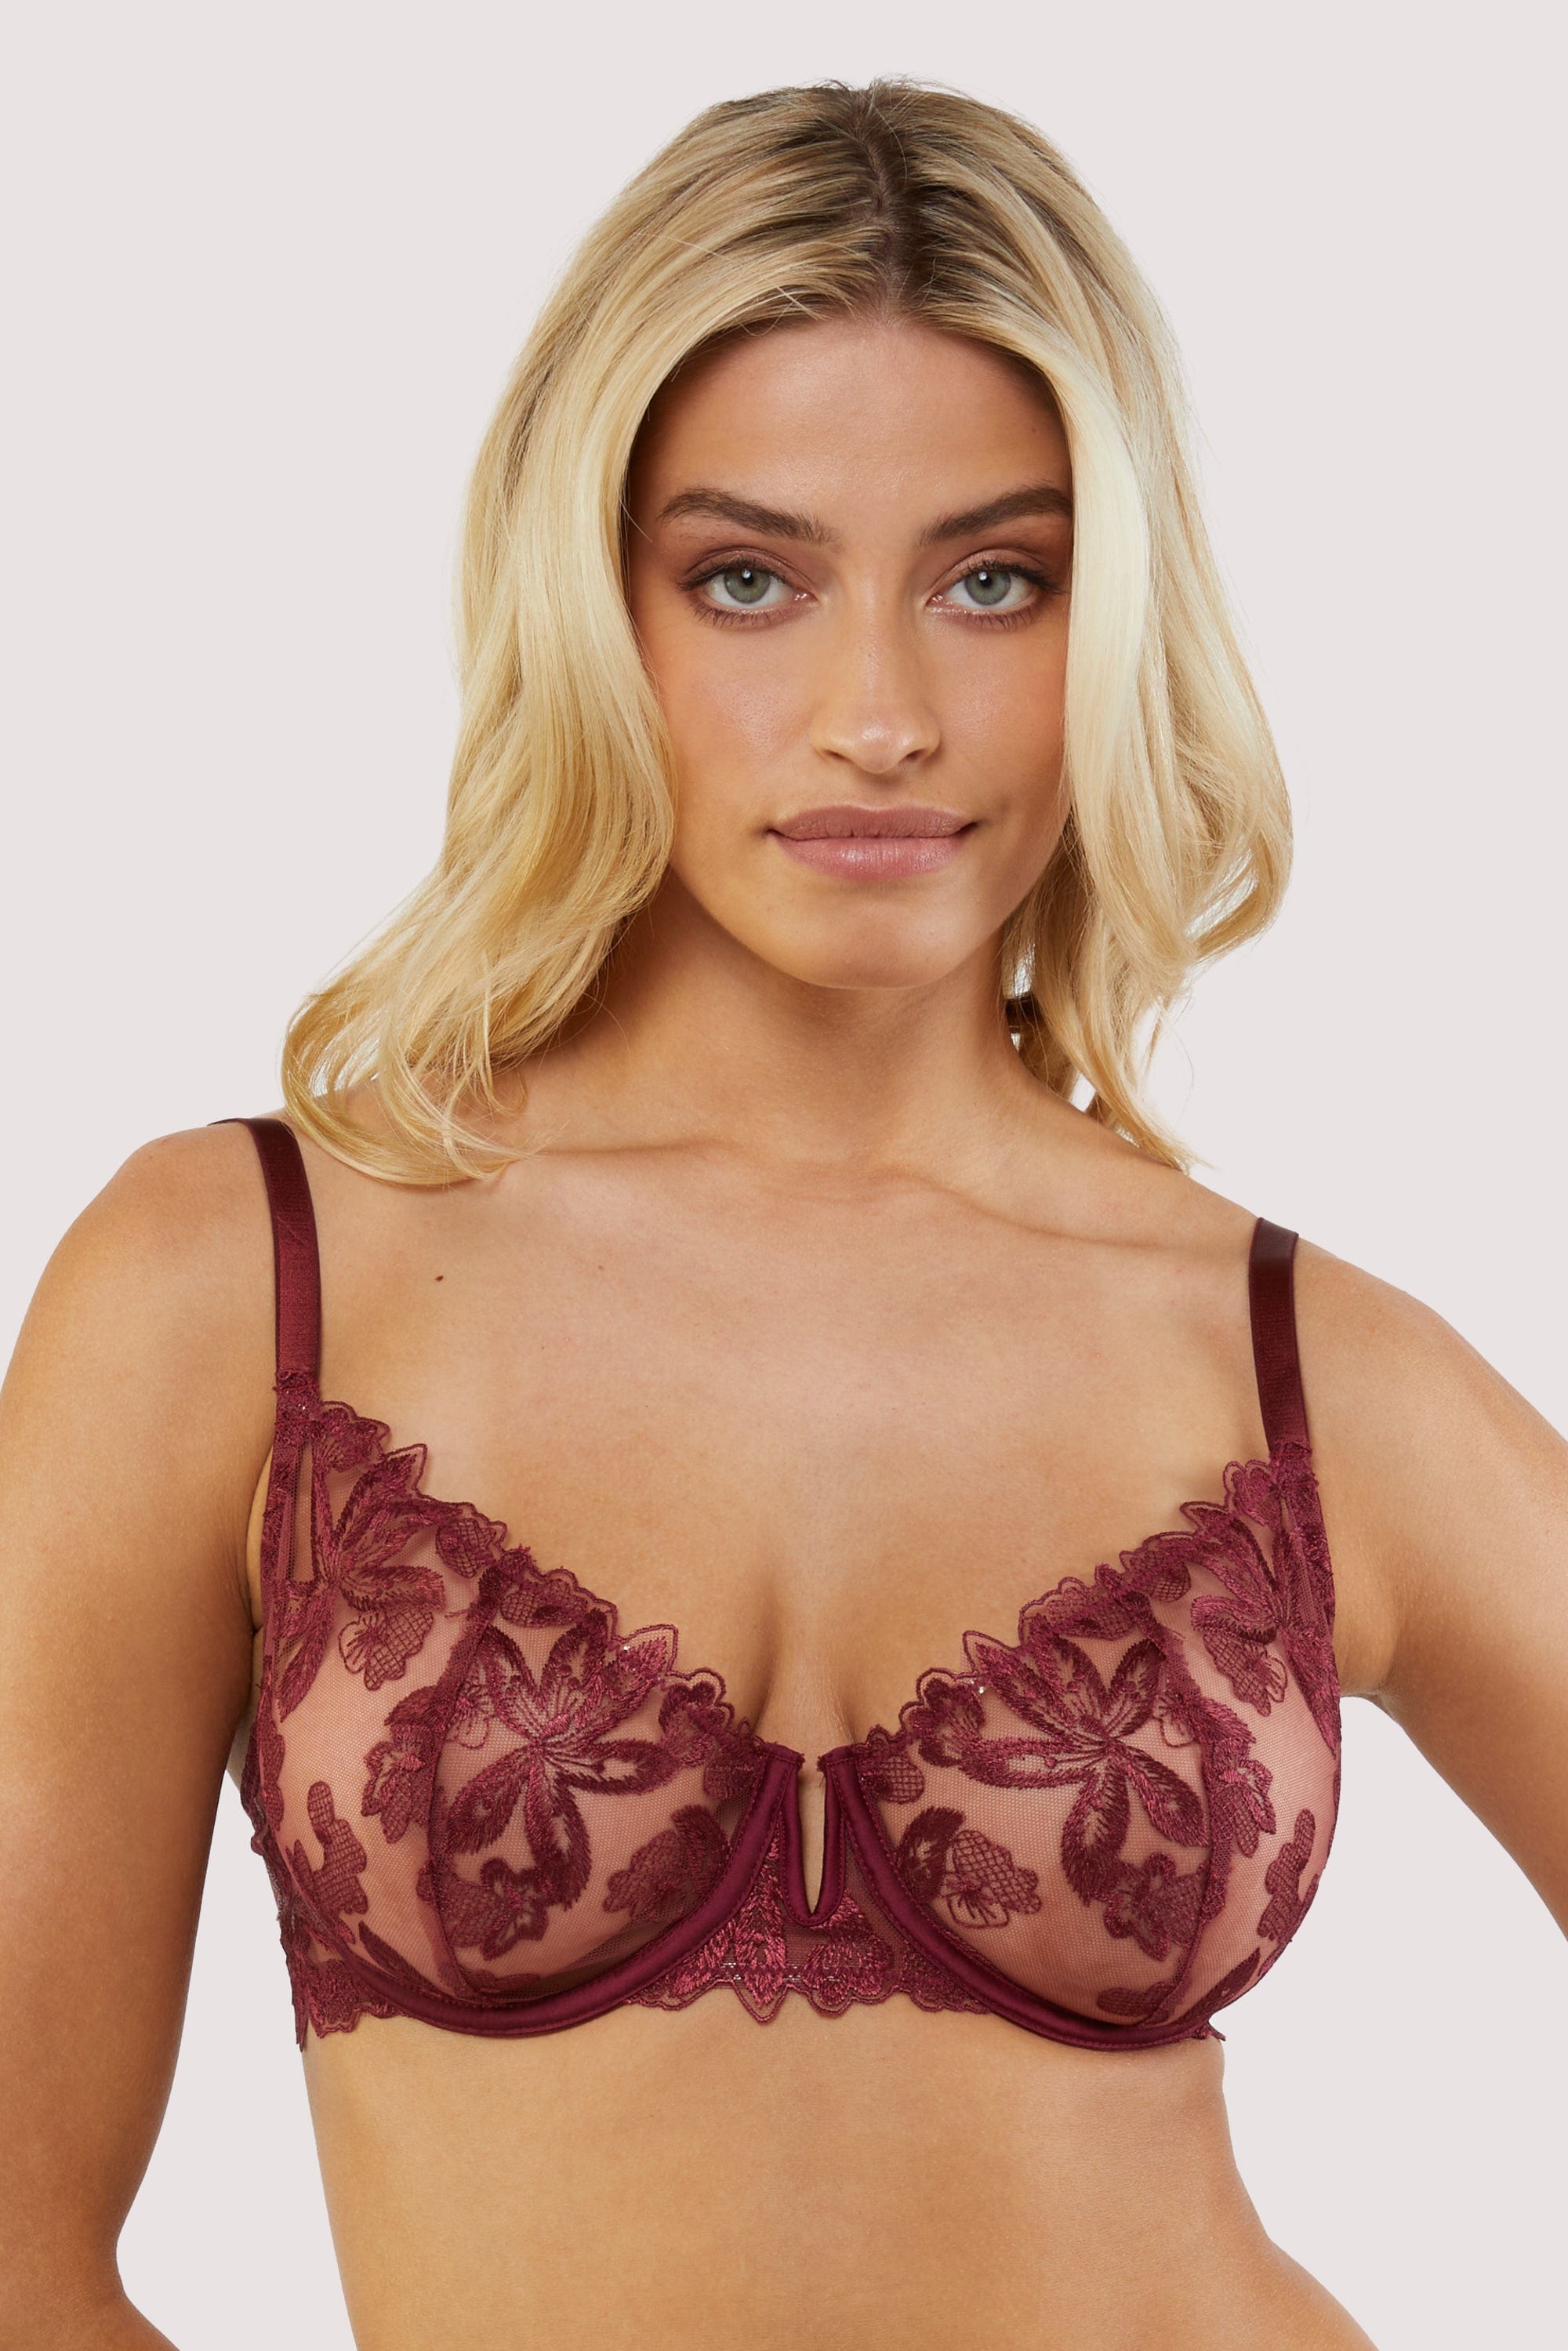 Soma Sensuous Brown lace underwire unlined bra size 34G